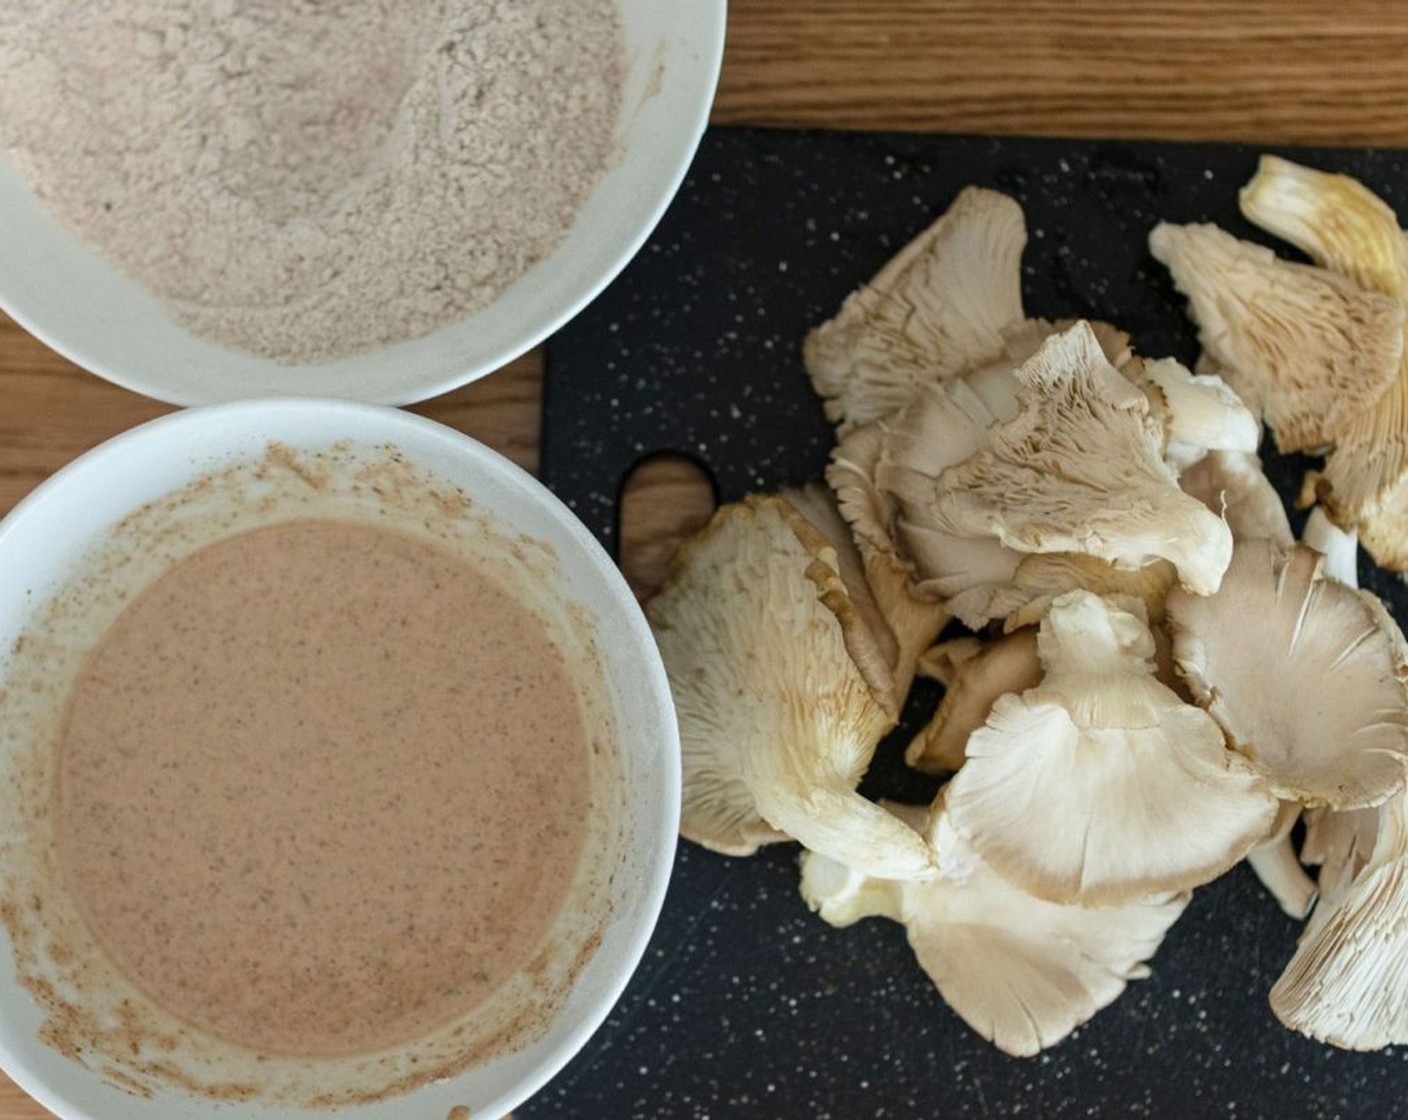 step 2 Place 80 grams of the spice mixture into a separate bowl, then add Unsweetened Soy Milk (3/4 cup) and Nutritional Yeast (1 Tbsp). Whisk gently until you get a smooth batter. You should now have one bowl of wet ingredients and one bowl of dry ingredients.